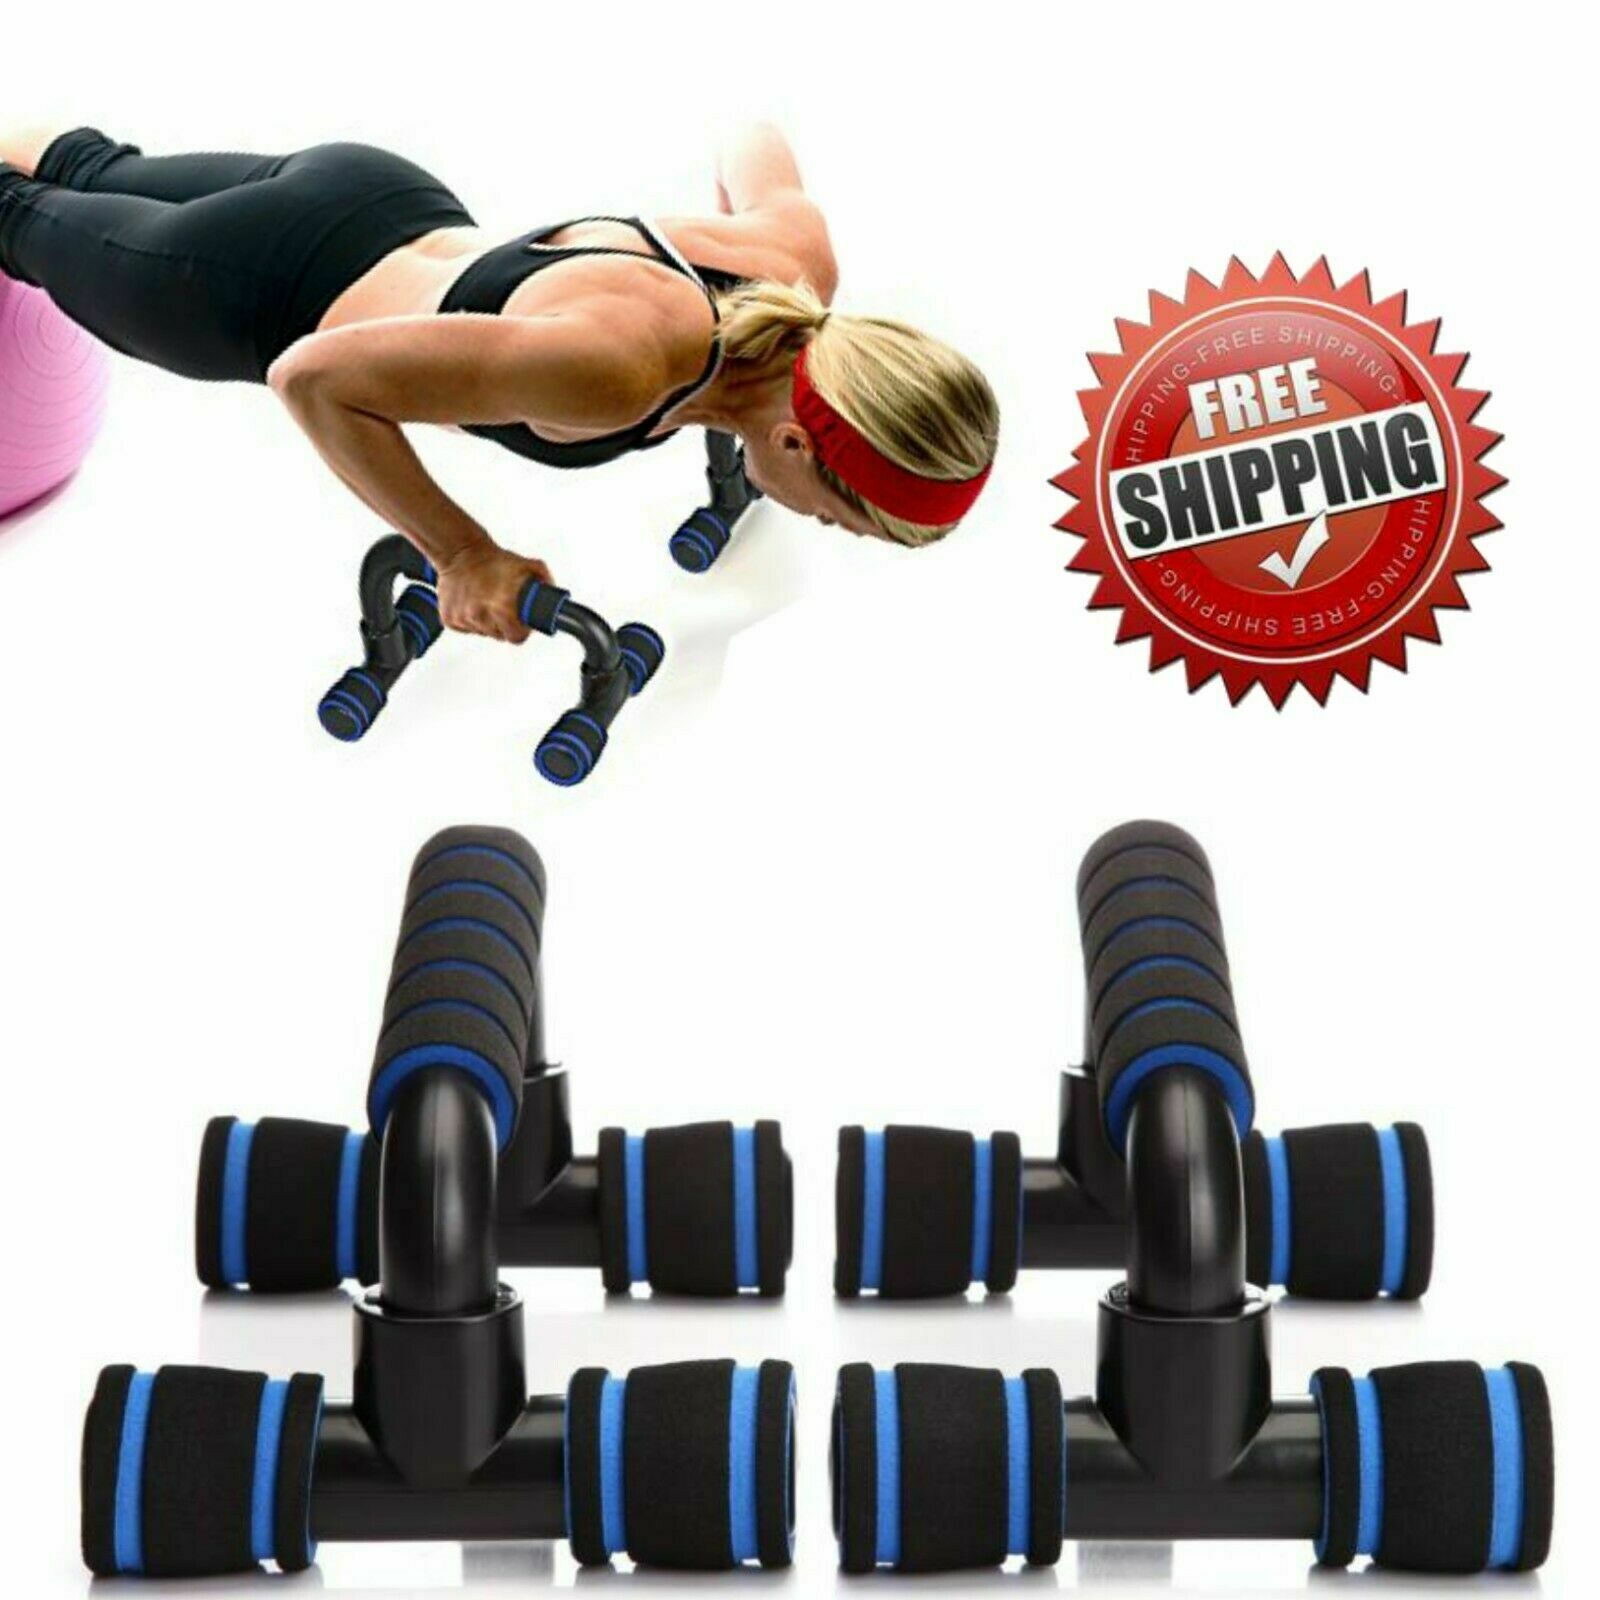 Details about   Body Sculptured Push Up Bars Press Handles Stands Exercise Grips FITNESS WORKOUT 